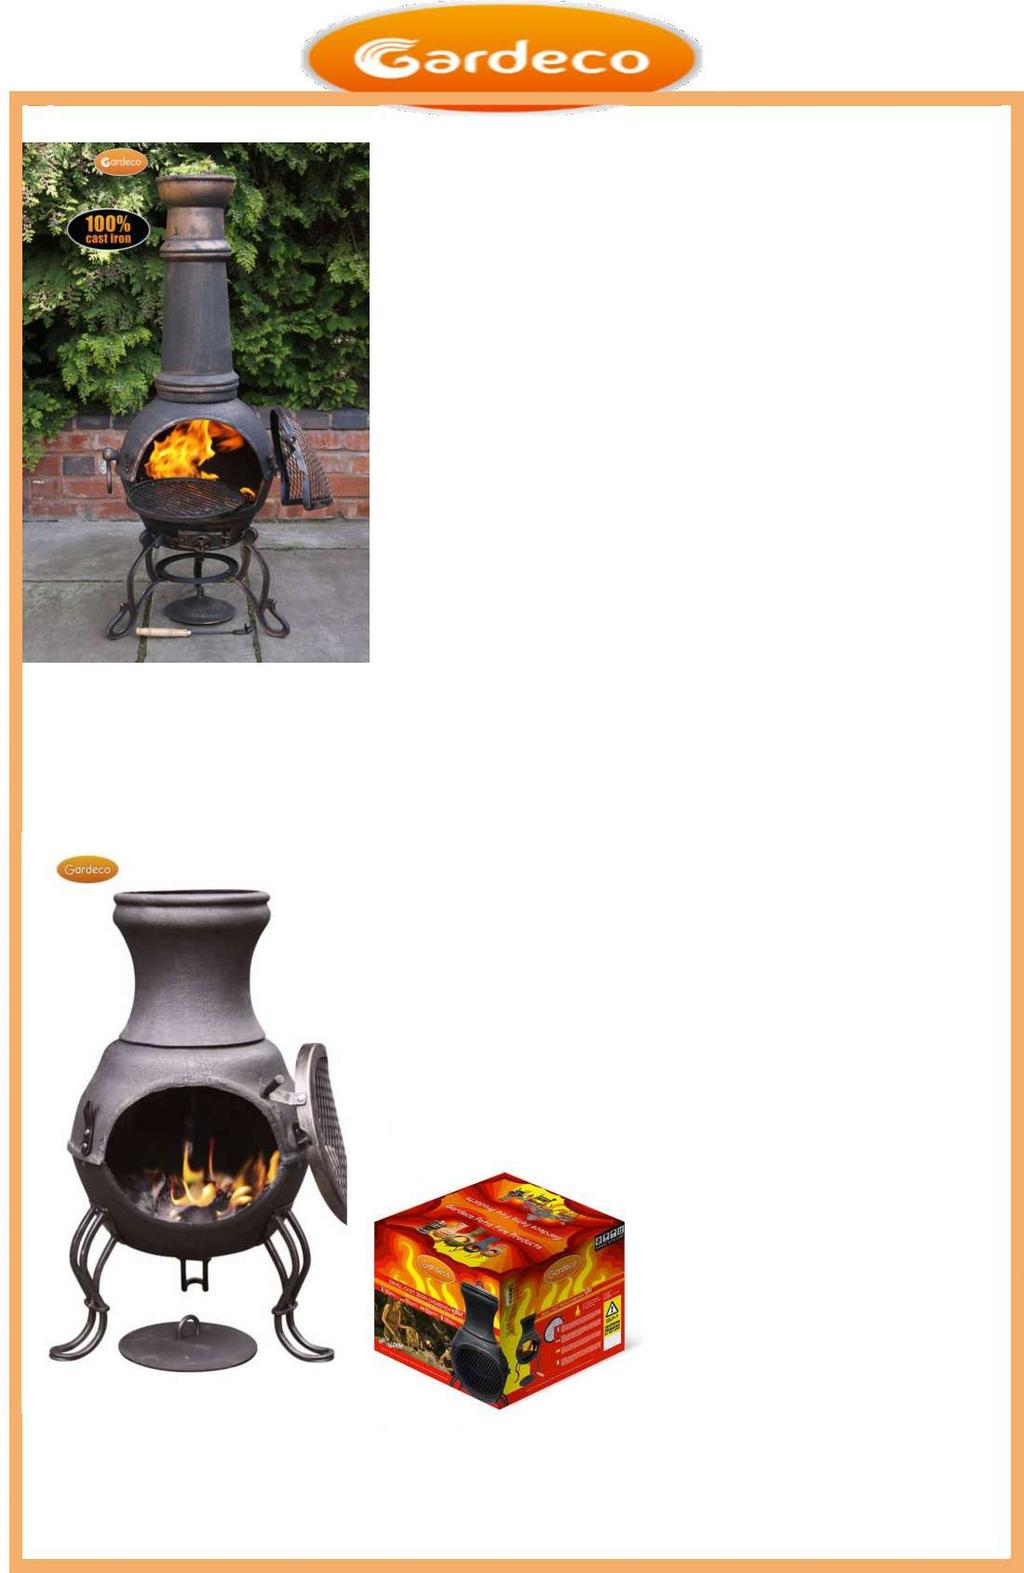 TOLEDO EX-LARGE CAST IRON Features: Size: 129cm high x 45cm diameter 100% cast iron Strong and durable, long-lasting Supplied with swivel cast iron BBQ grill with balcony Hinged mesh door, rain lid,